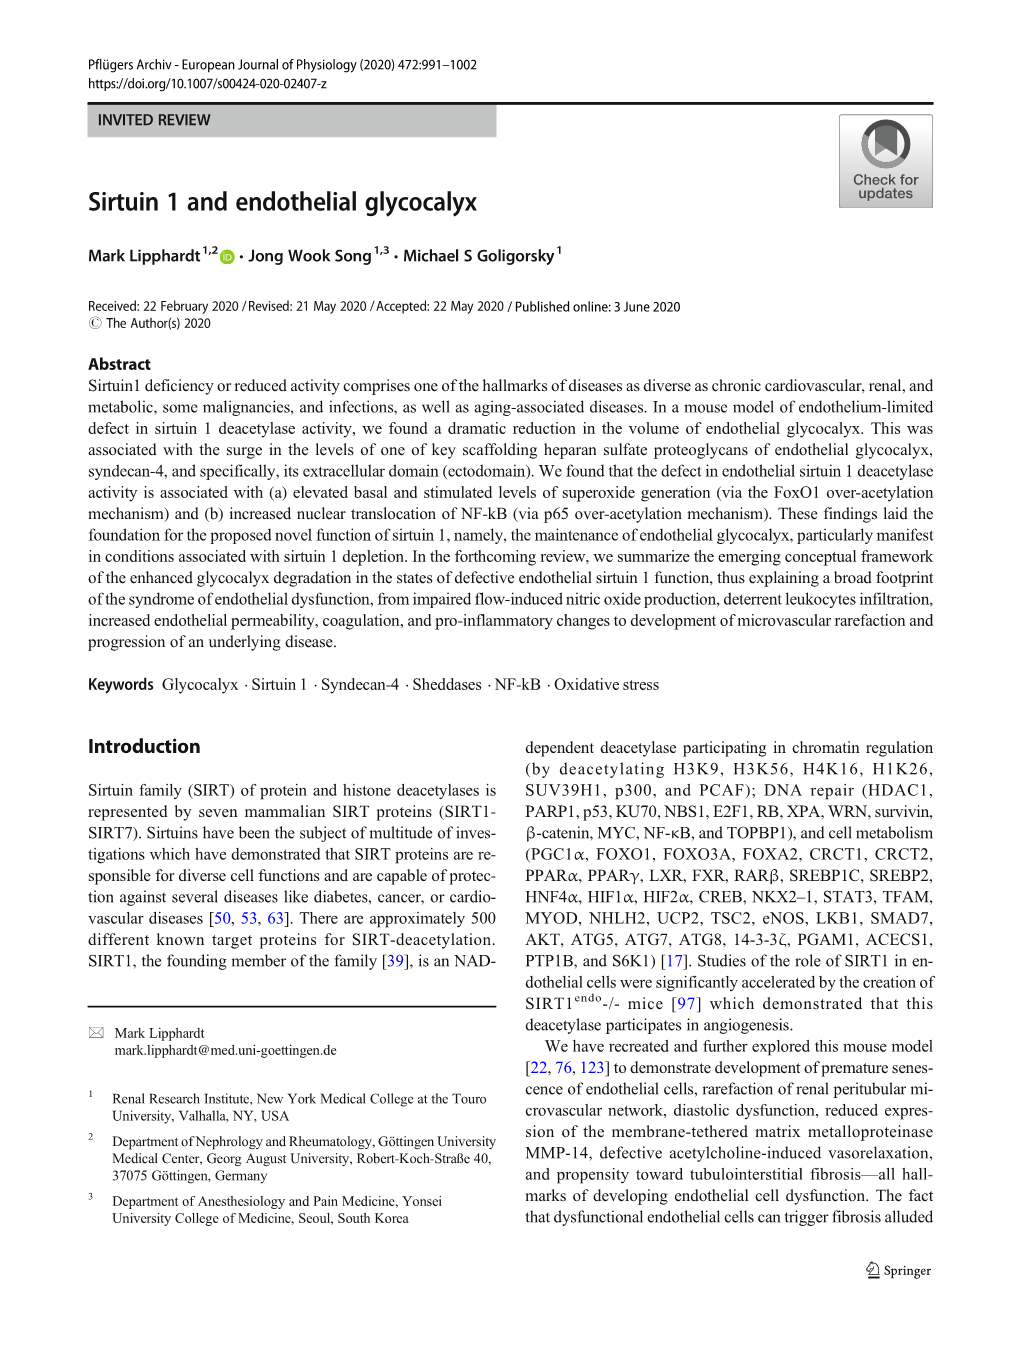 Sirtuin 1 and Endothelial Glycocalyx